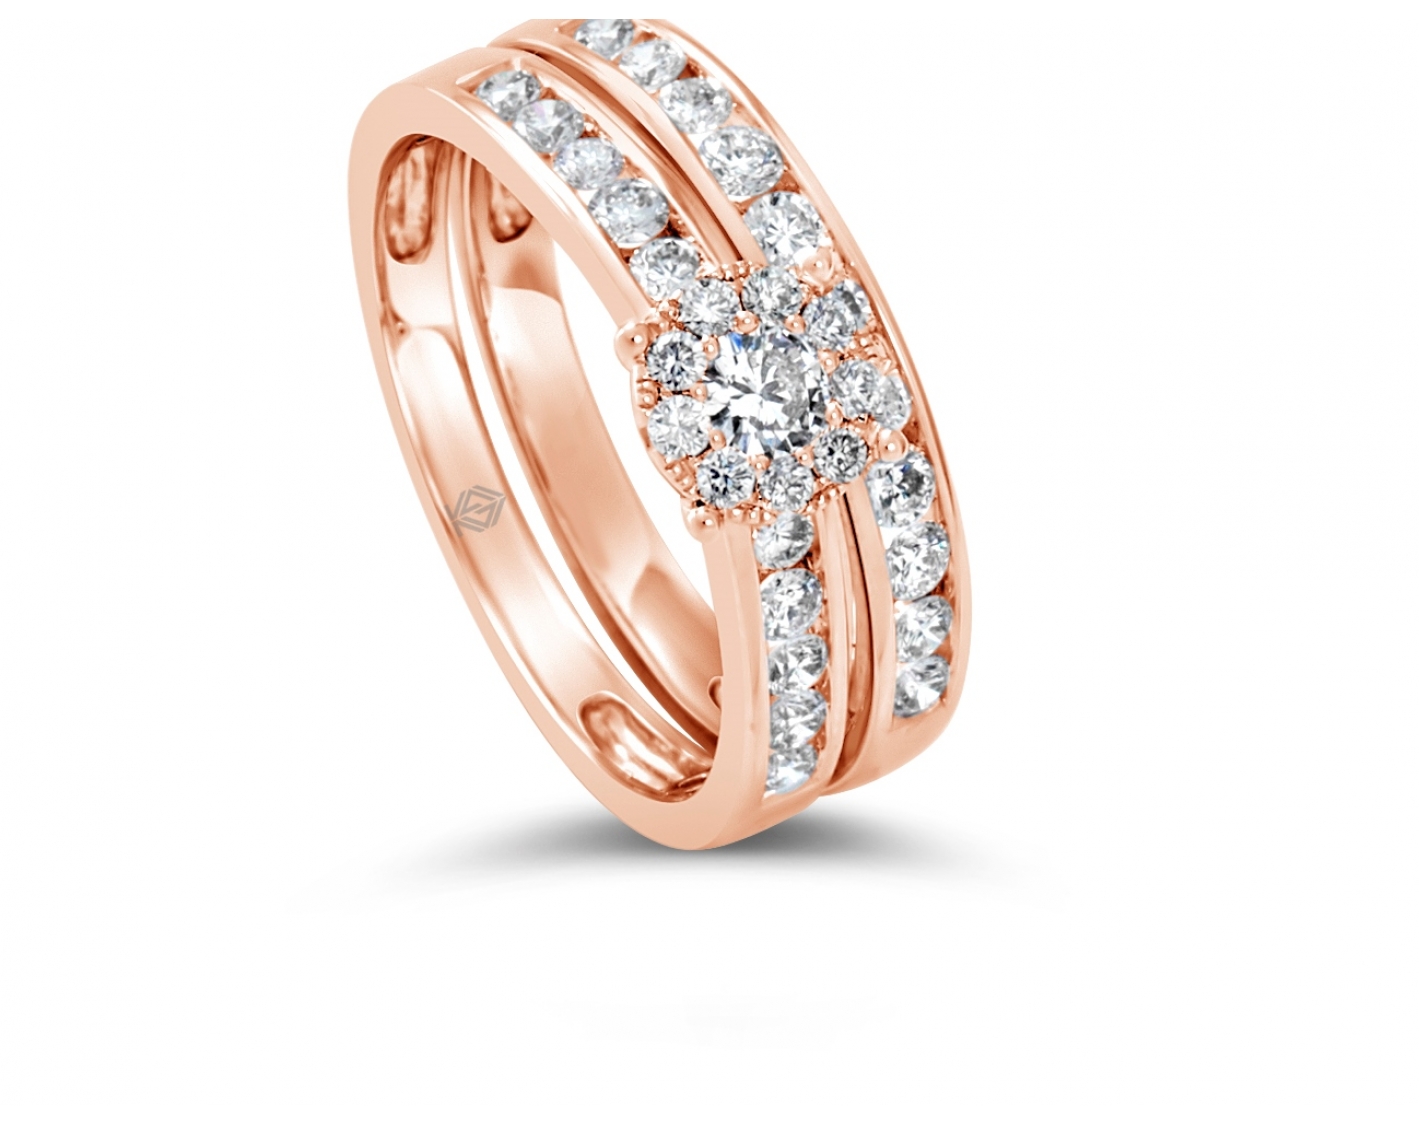 18k rose gold halo illusion set engagement ring & matching wedding band in channel set (2 rings)